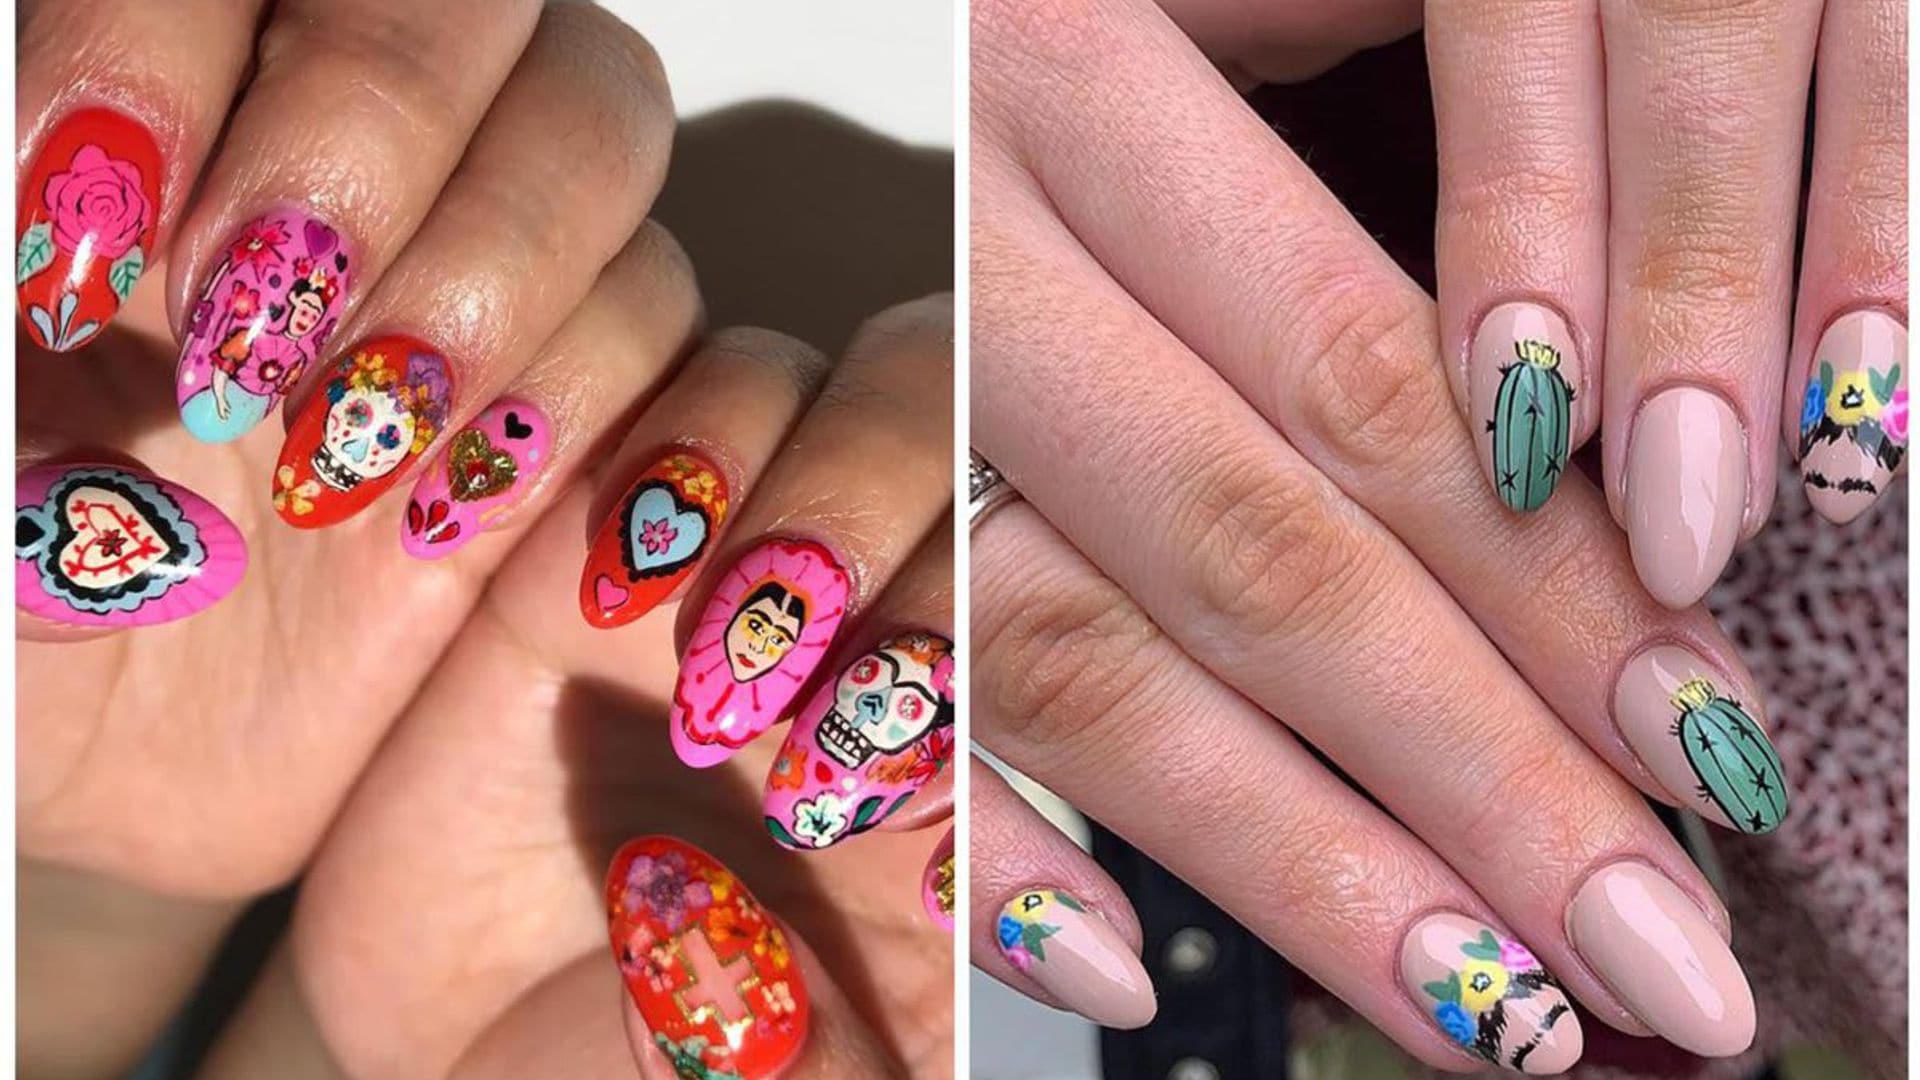 Take your nails to the next level with these Frida Kahlo-inspired nails